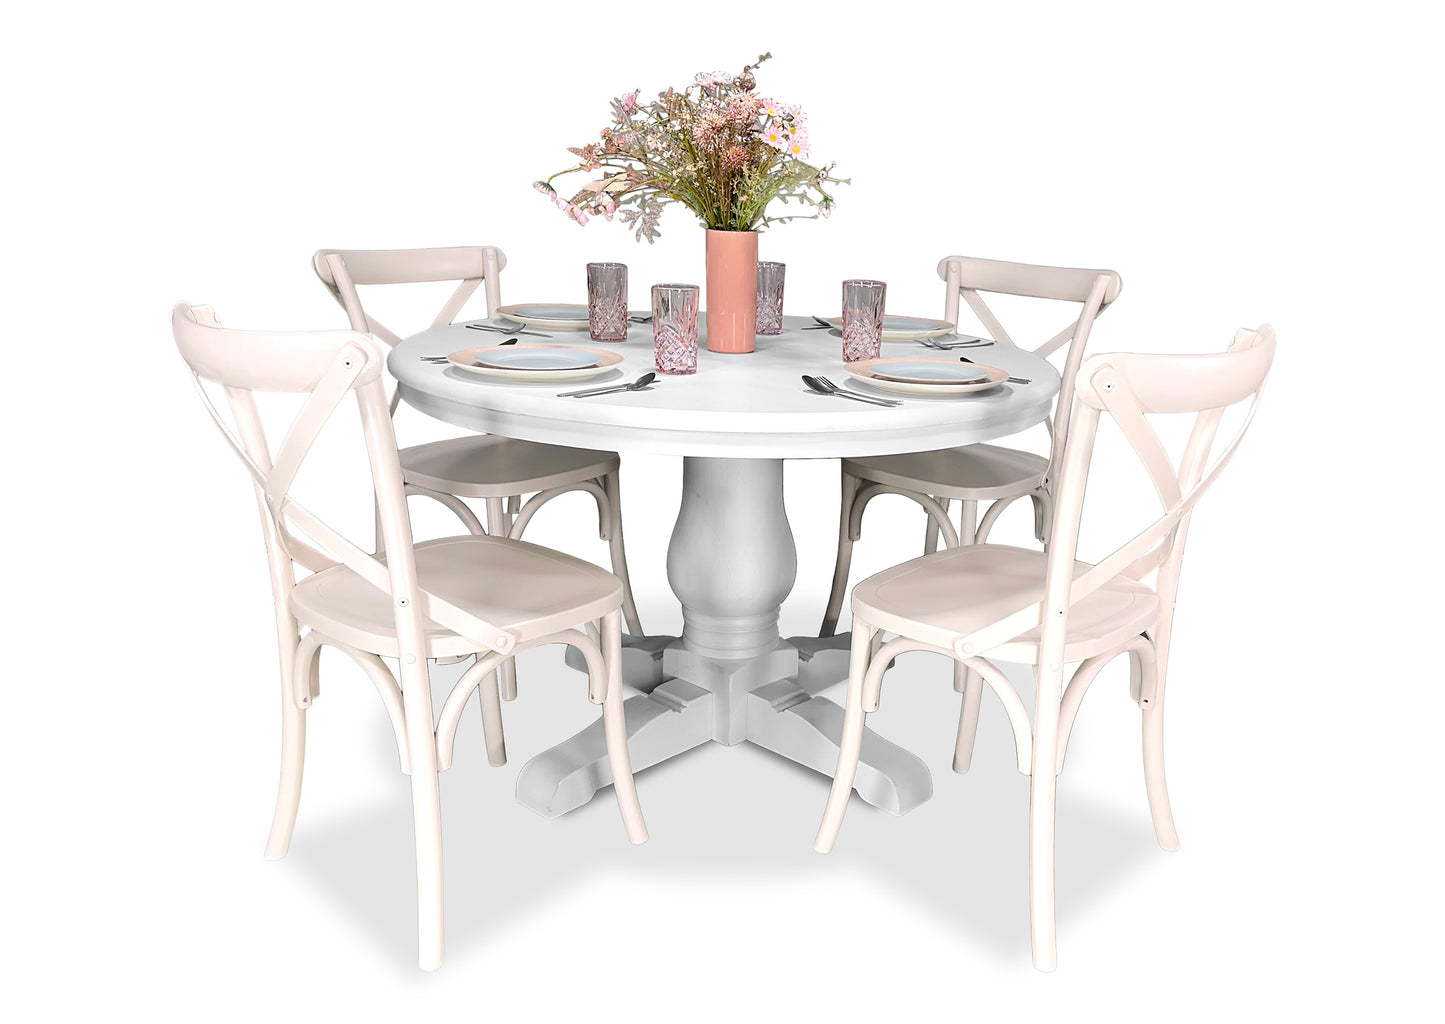 Parisienne White & Cross Back Dining Suite (1200mm)